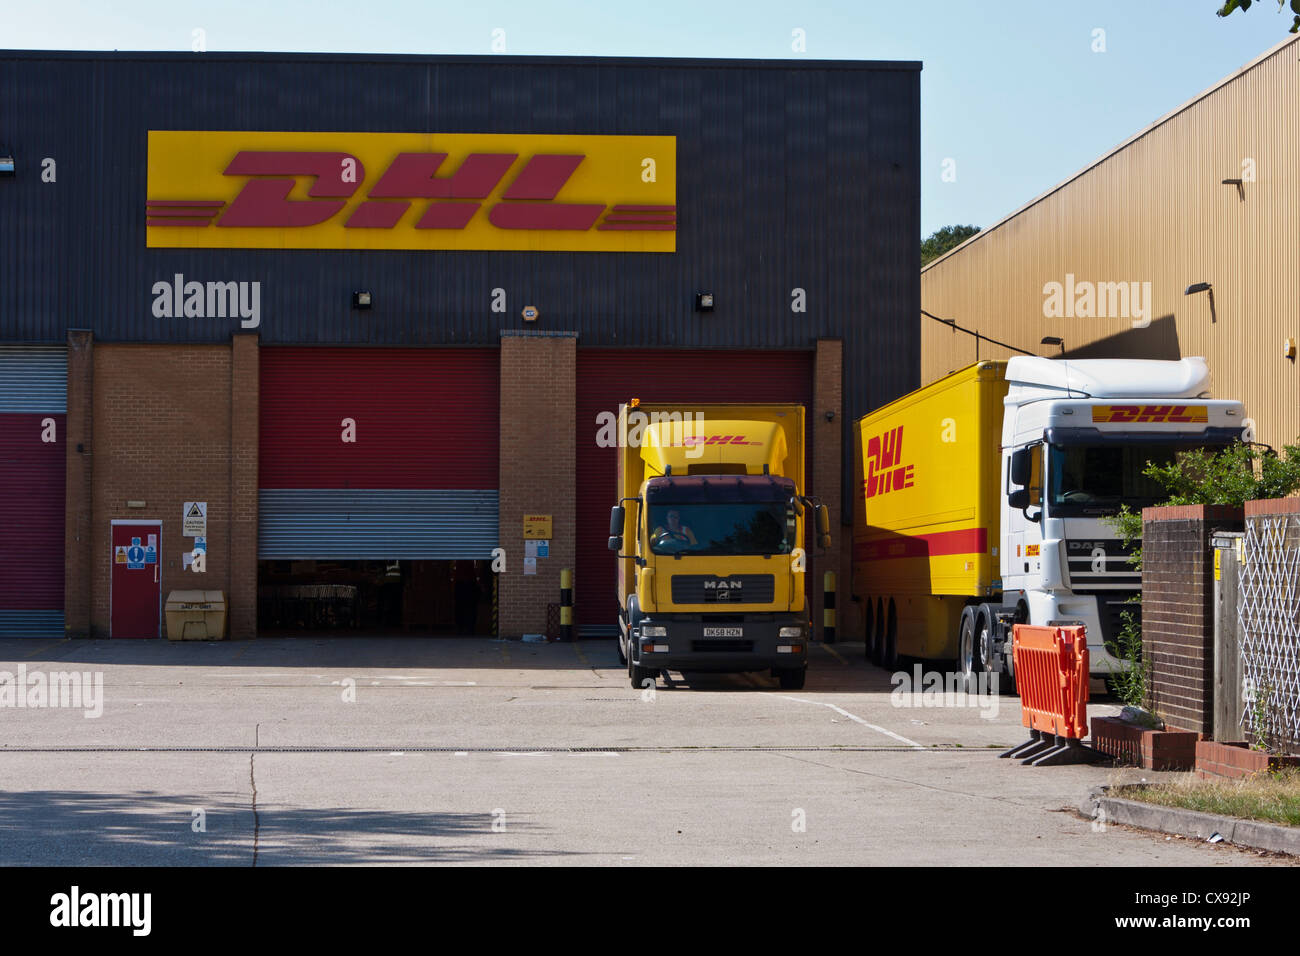 Dhl Trucks High Resolution Stock Photography and Images - Alamy